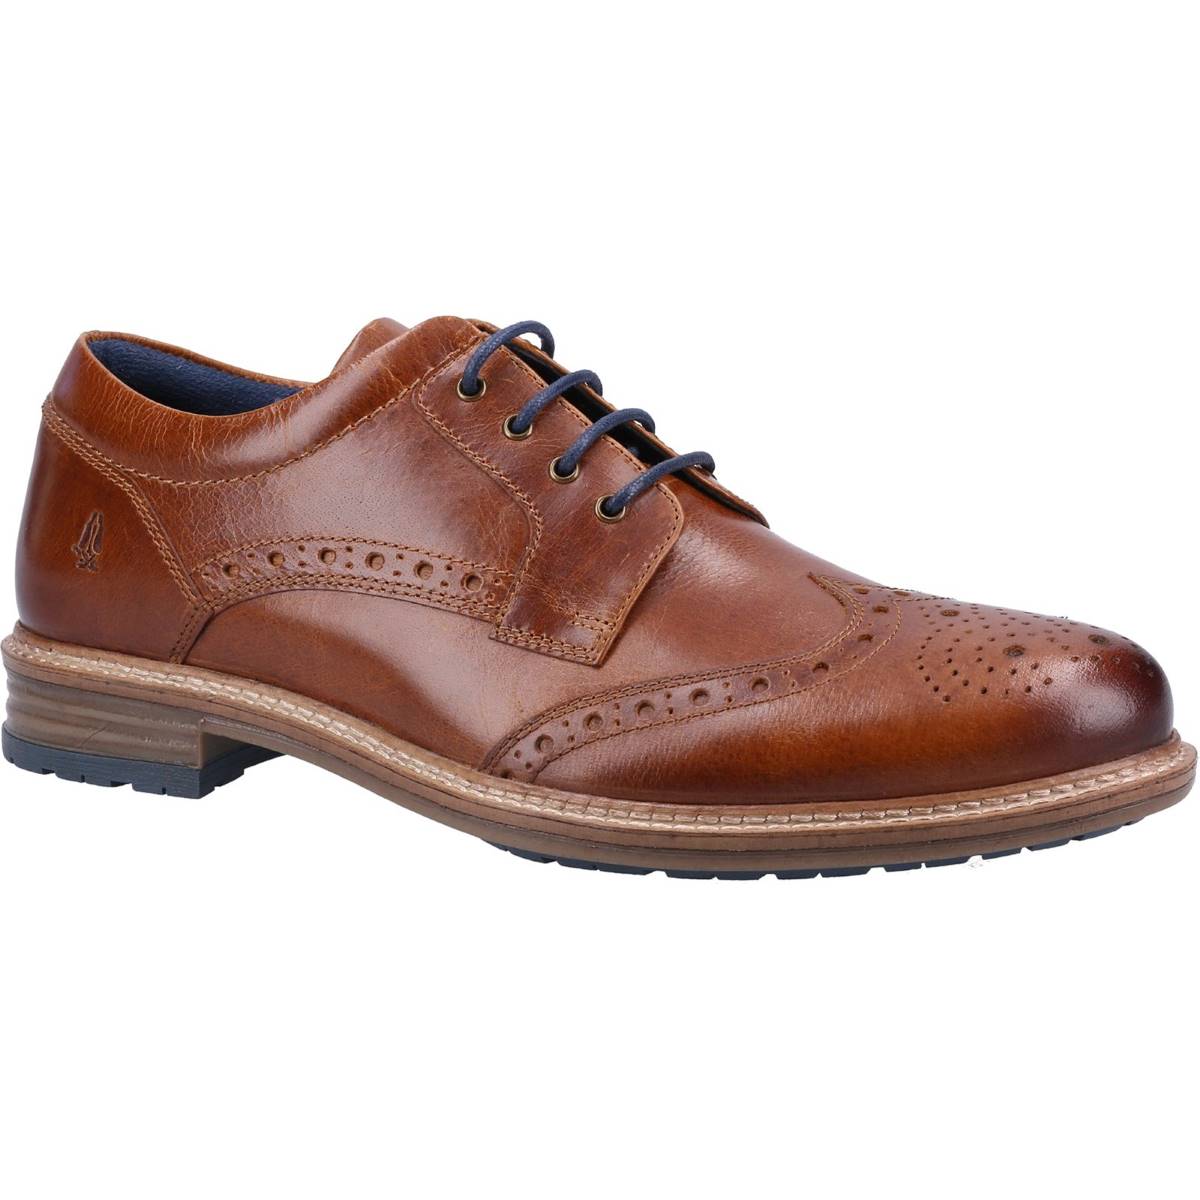 Hush Puppies Jayden Brogue Tan Mens formal shoes HP-36710-68545 in a Plain Leather in Size 12